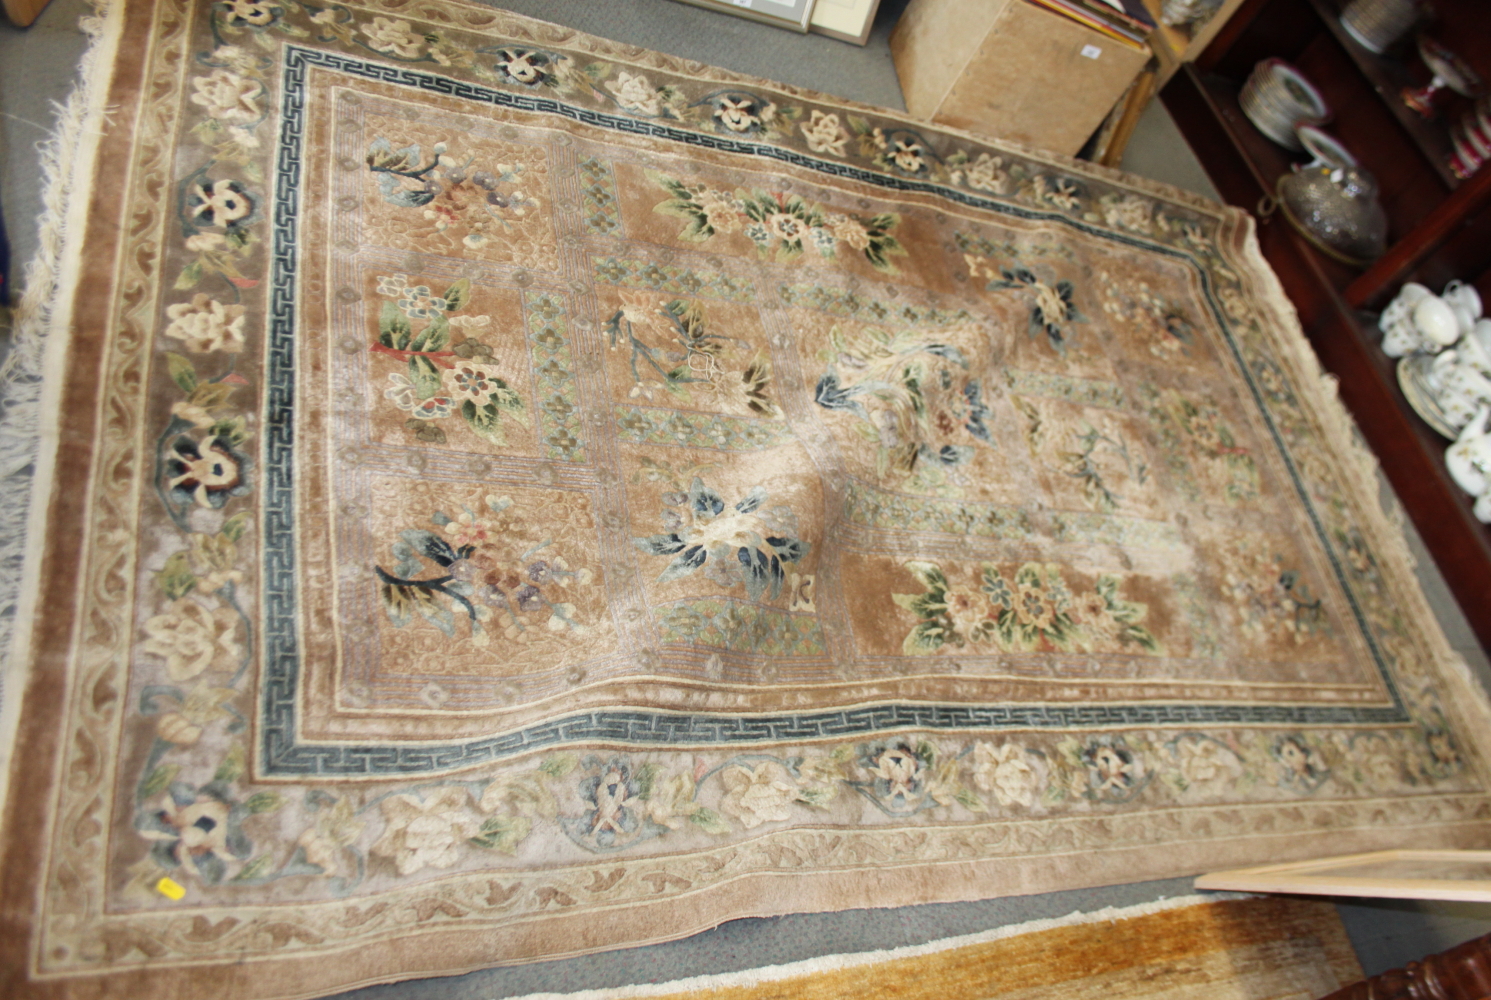 A Chinese silk carpet decorated thirteen floral panels on a beige ground and main floral border